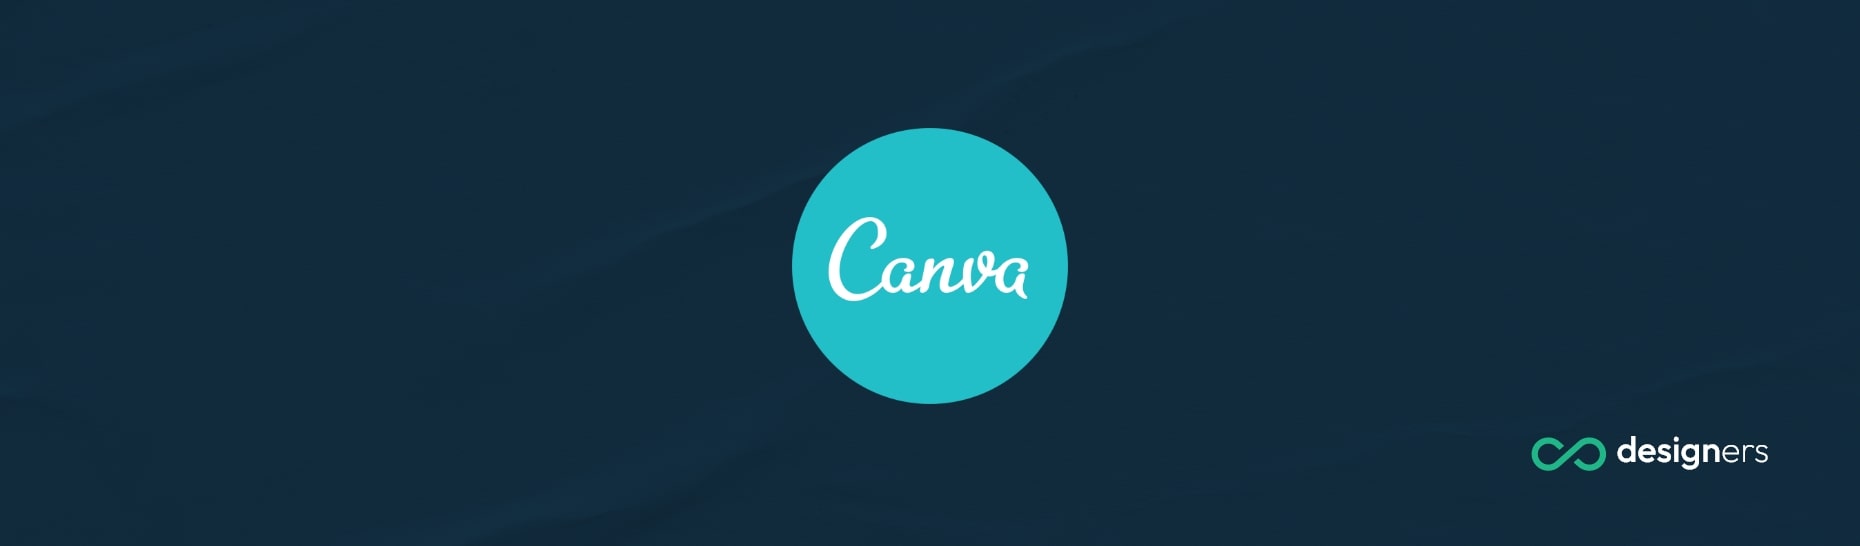 Is Canva Good for Videos?